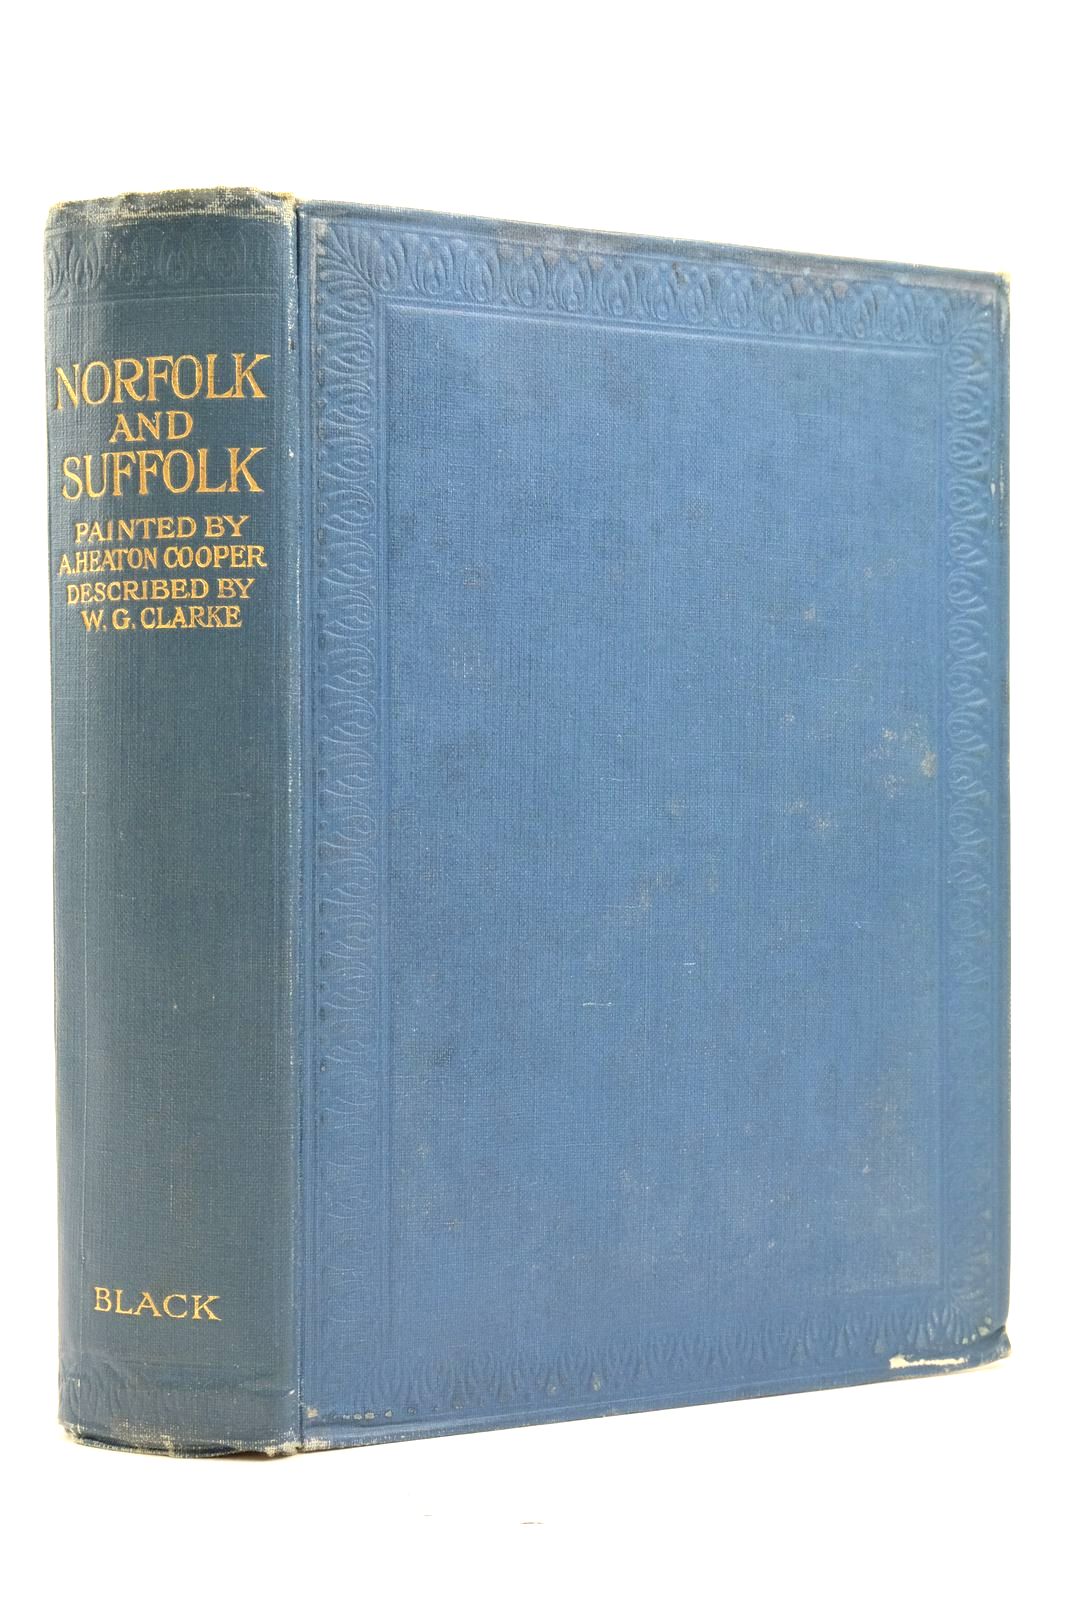 Photo of NORFOLK & SUFFOLK written by Clarke, W.G. illustrated by Cooper, A. Heaton published by A. & C. Black Ltd. (STOCK CODE: 2137334)  for sale by Stella & Rose's Books